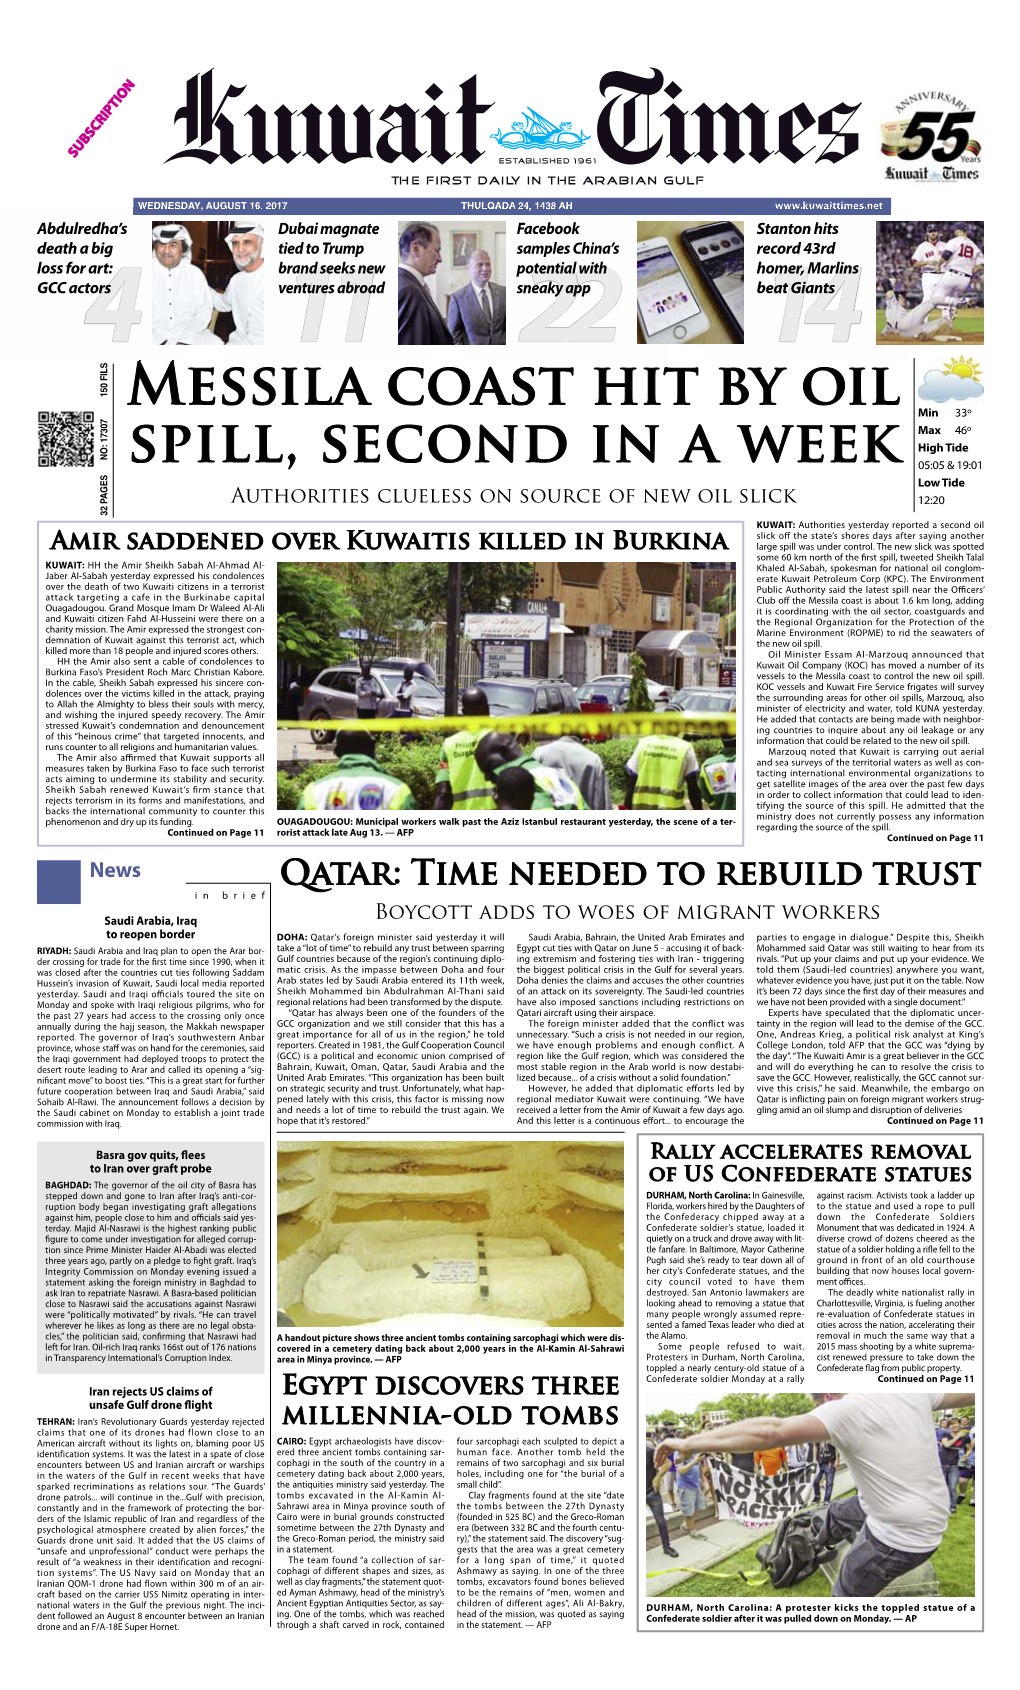 Messila Coast Hit by Oil Spill, Second in a Week